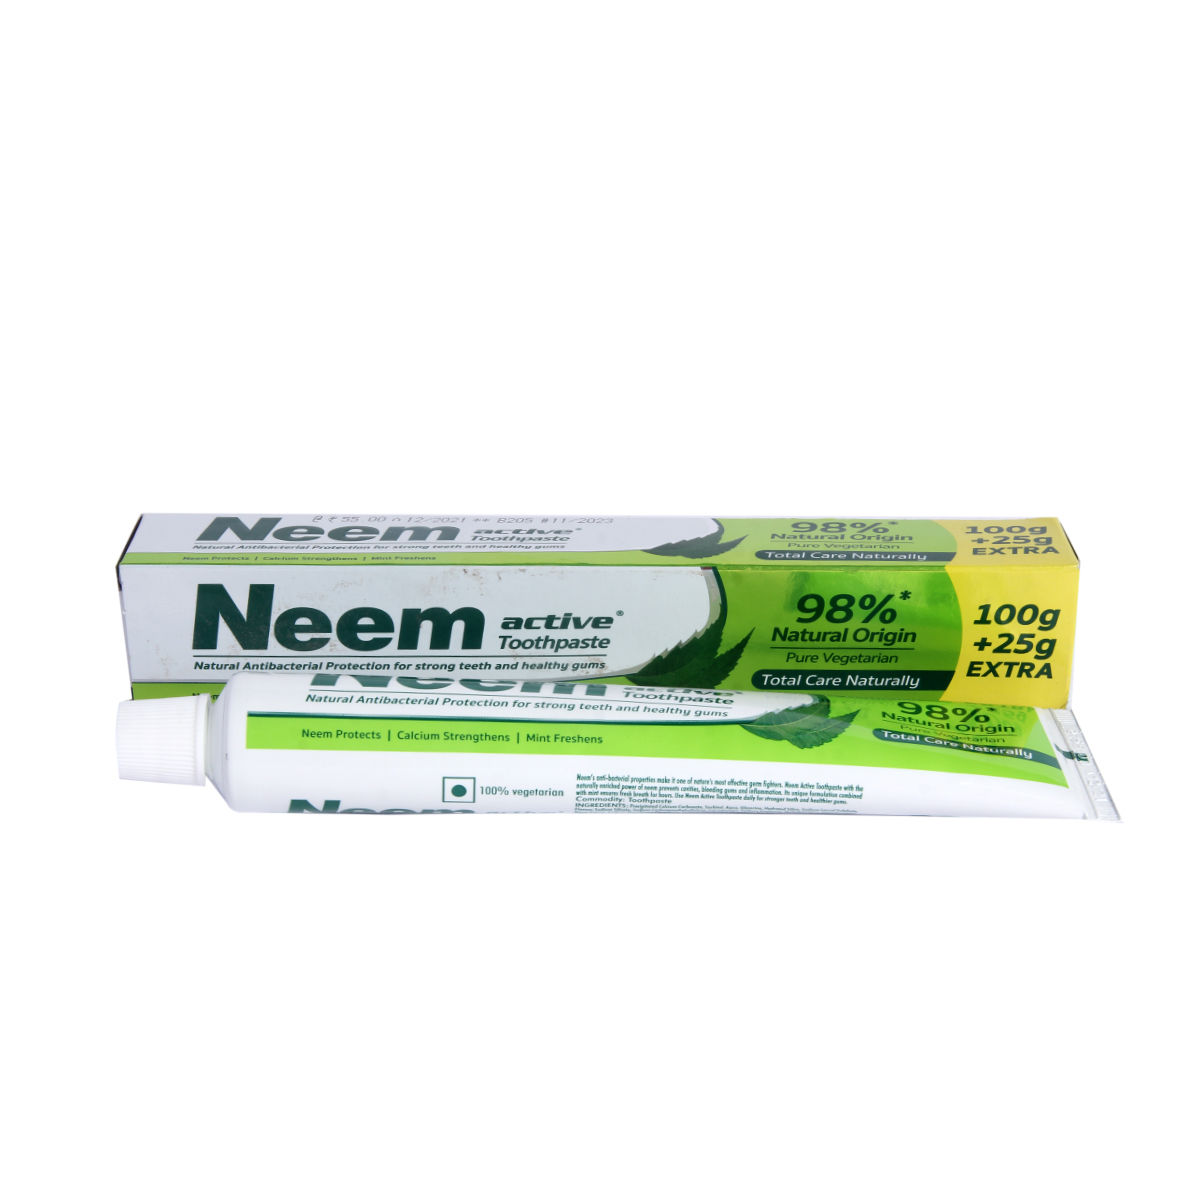 Neem Active Toothpaste, 100 gm, Pack of 1 